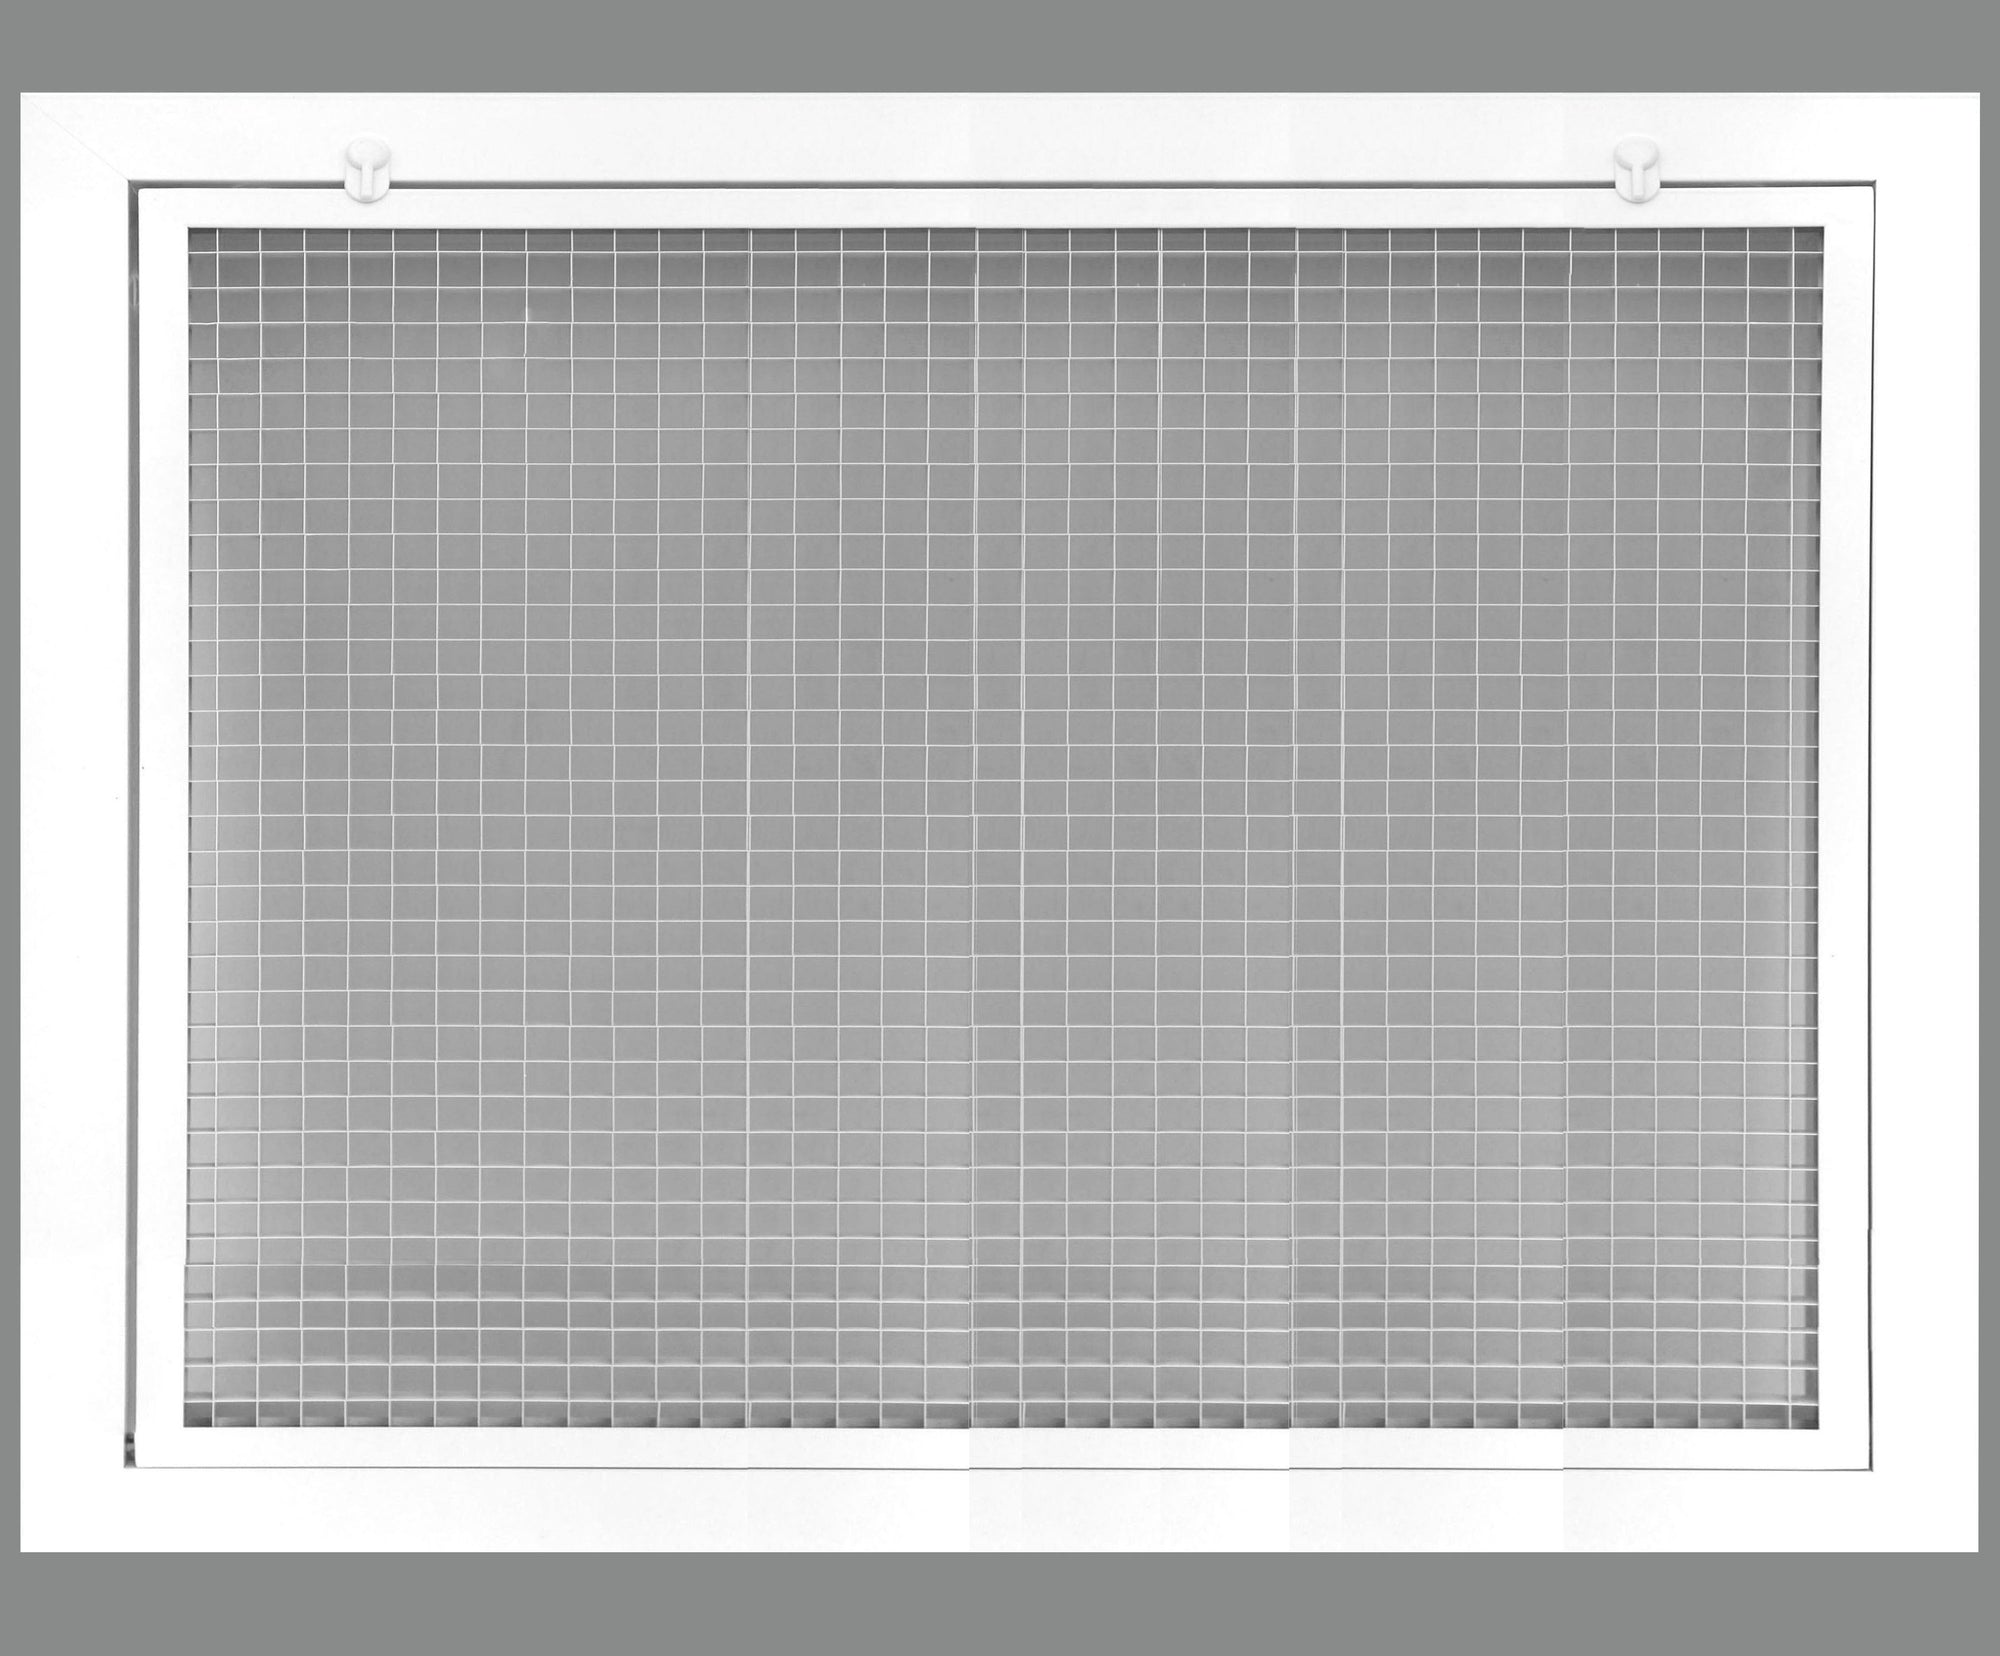 30" x 26" Cube Core Eggcrate Return Air Filter Grille for 1" Filter